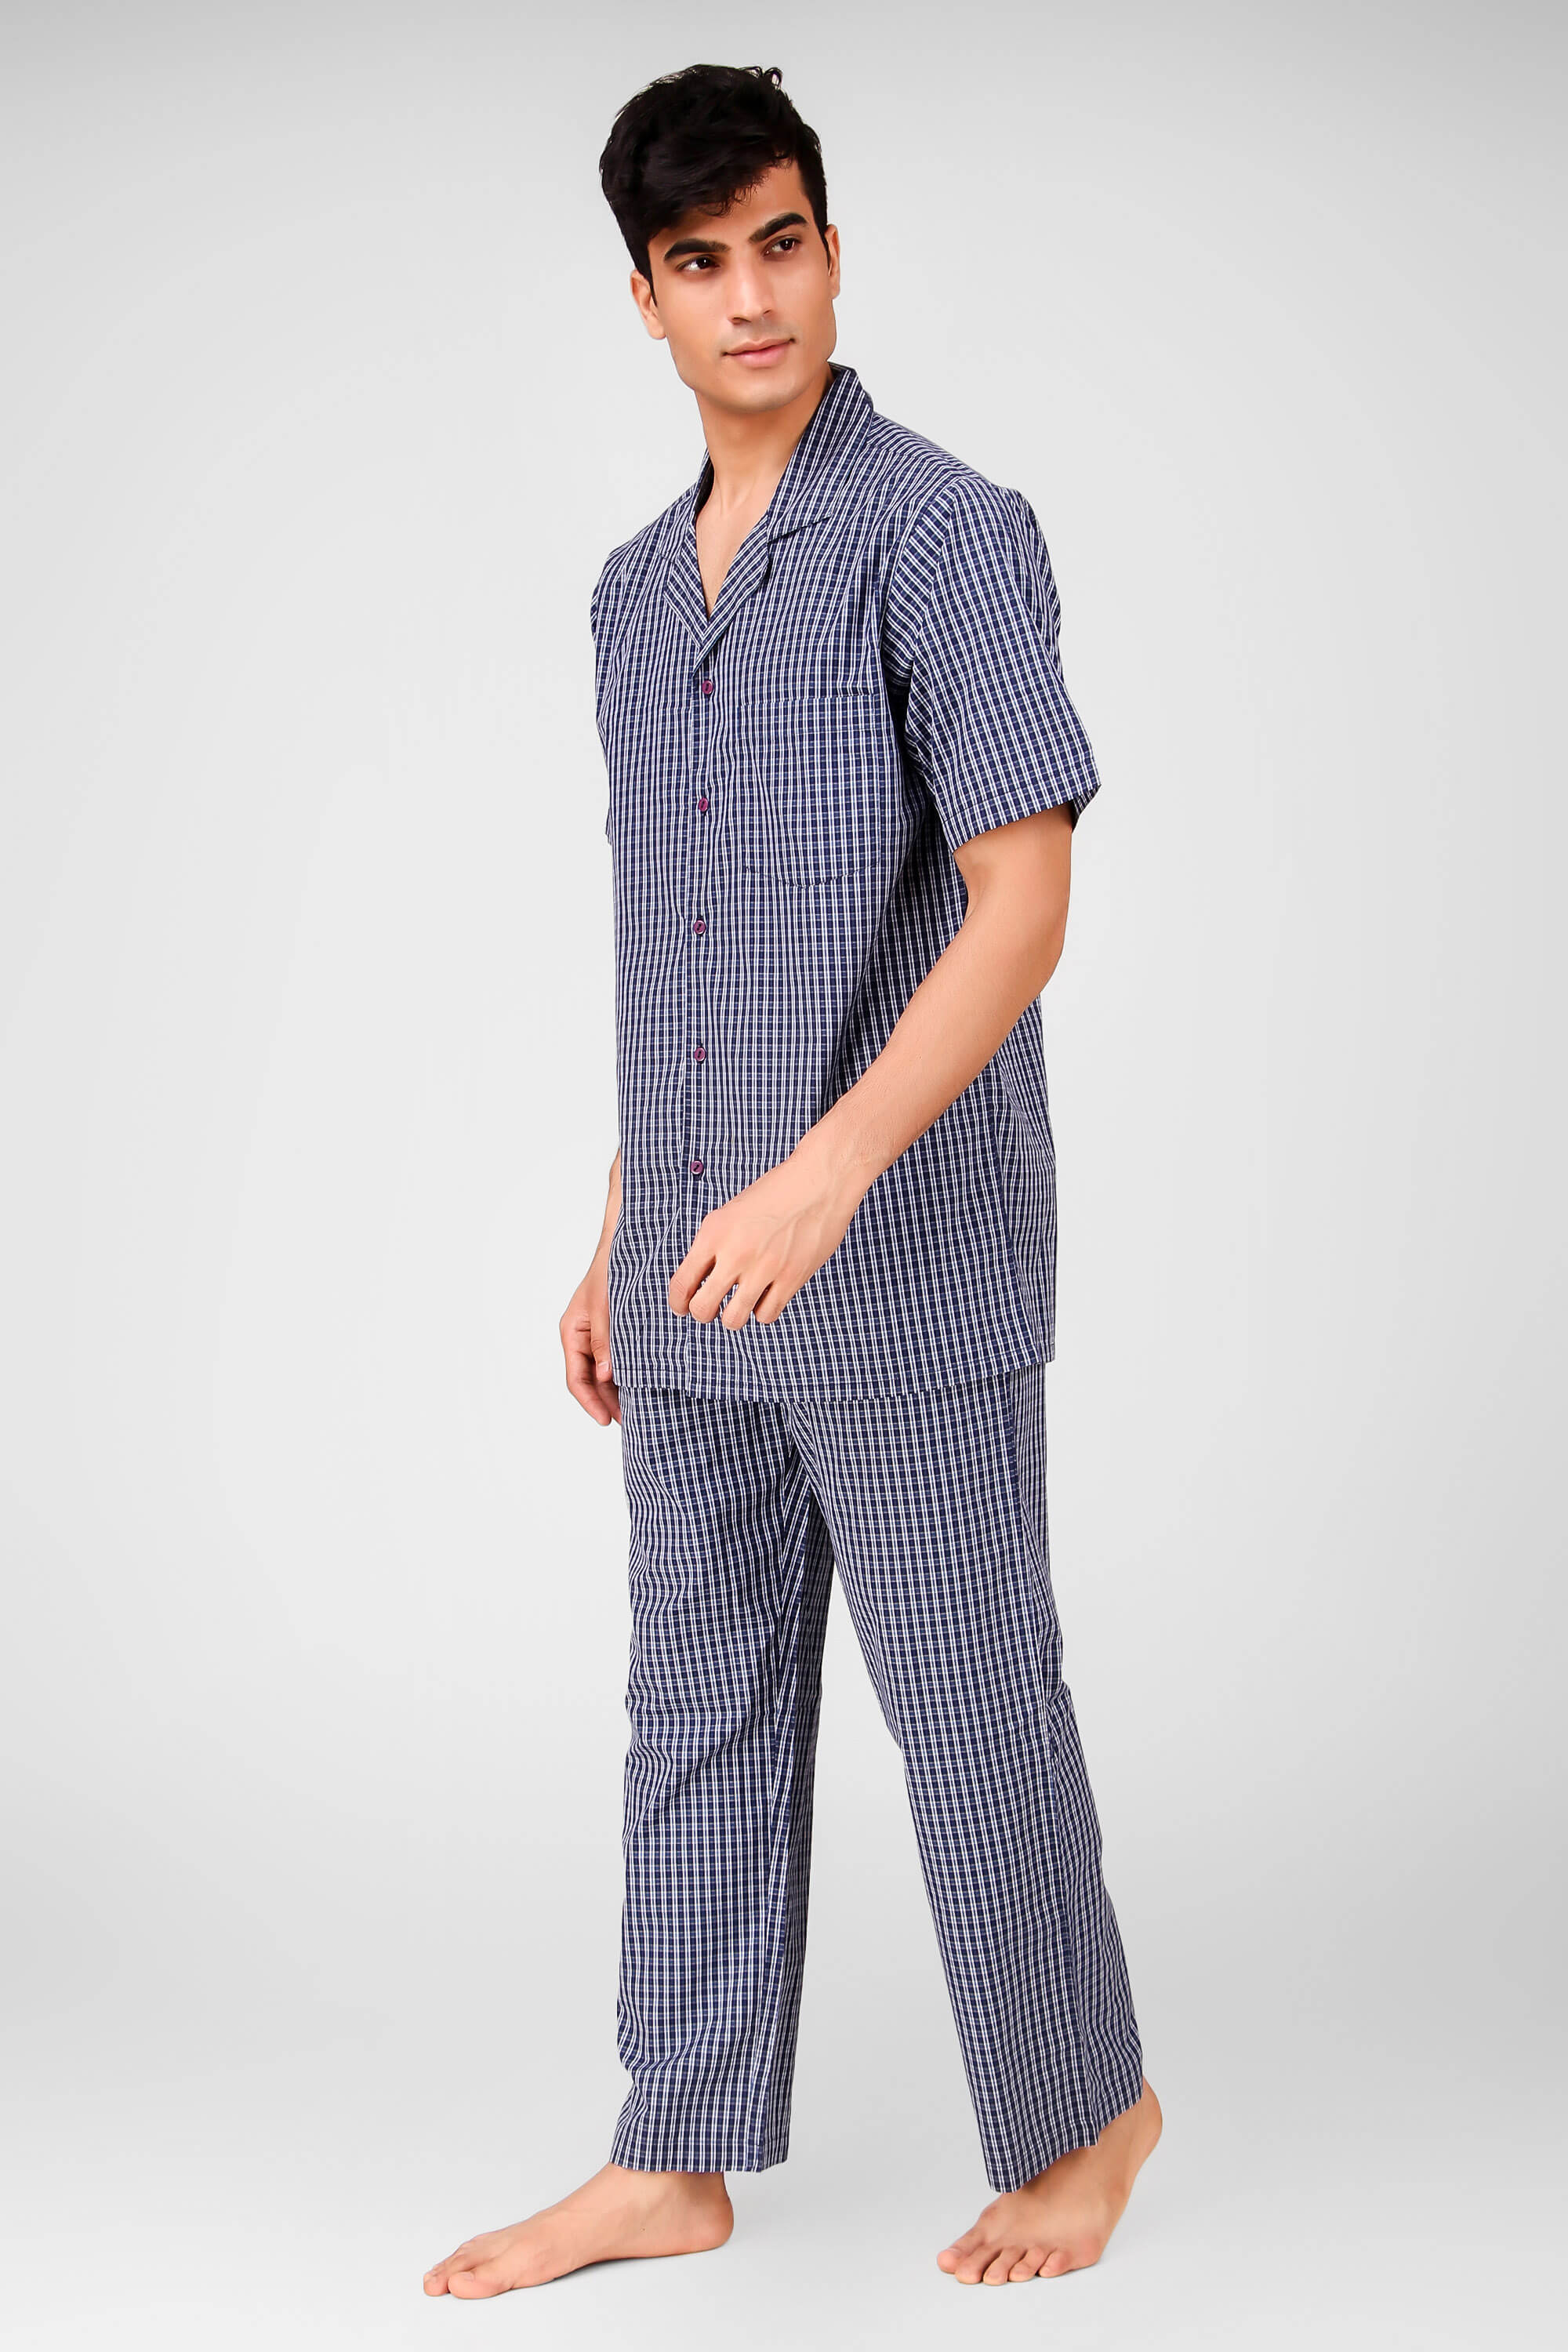 Night Suits for Men, Buy Comfortable and Stylish Nightwear